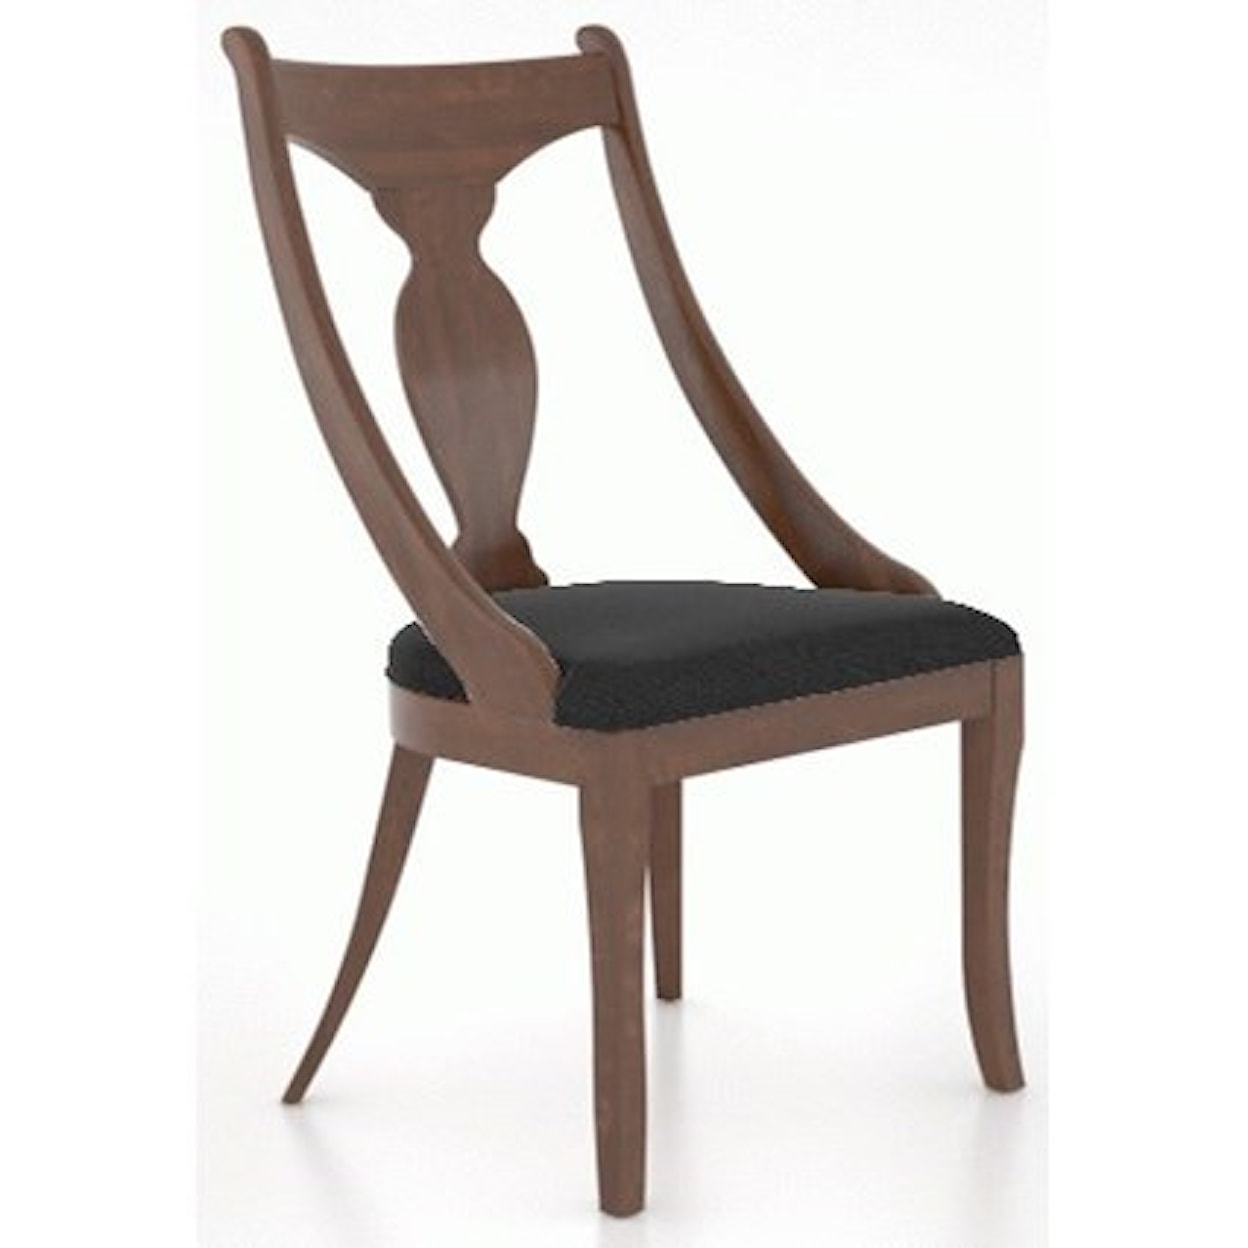 Canadel Canadel Customizable Chair with Upholstered Seat